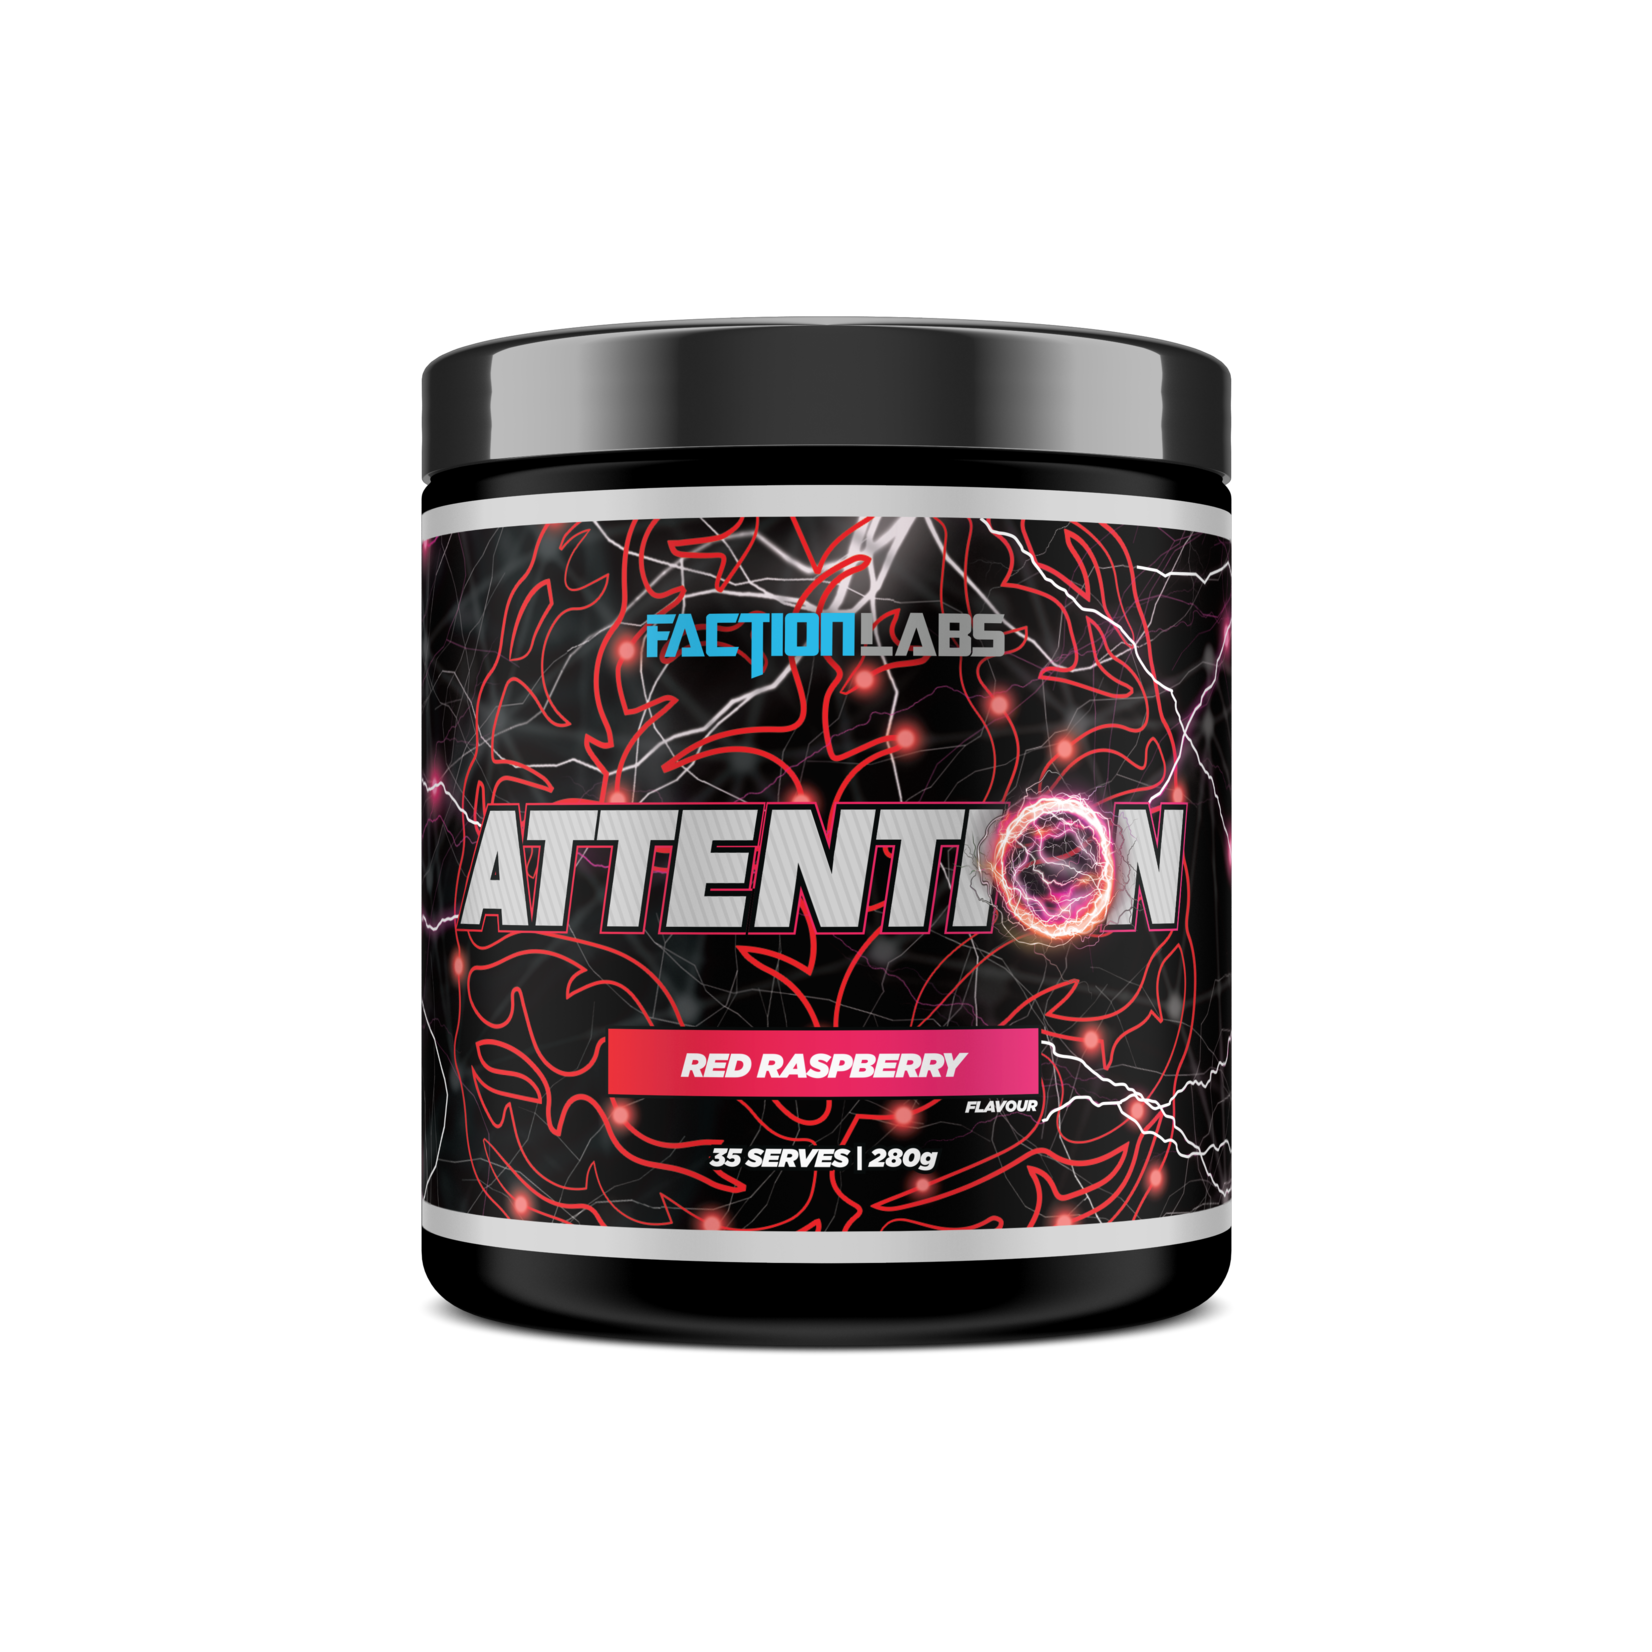 Faction Labs Attention by Faction Labs - 35 Serves